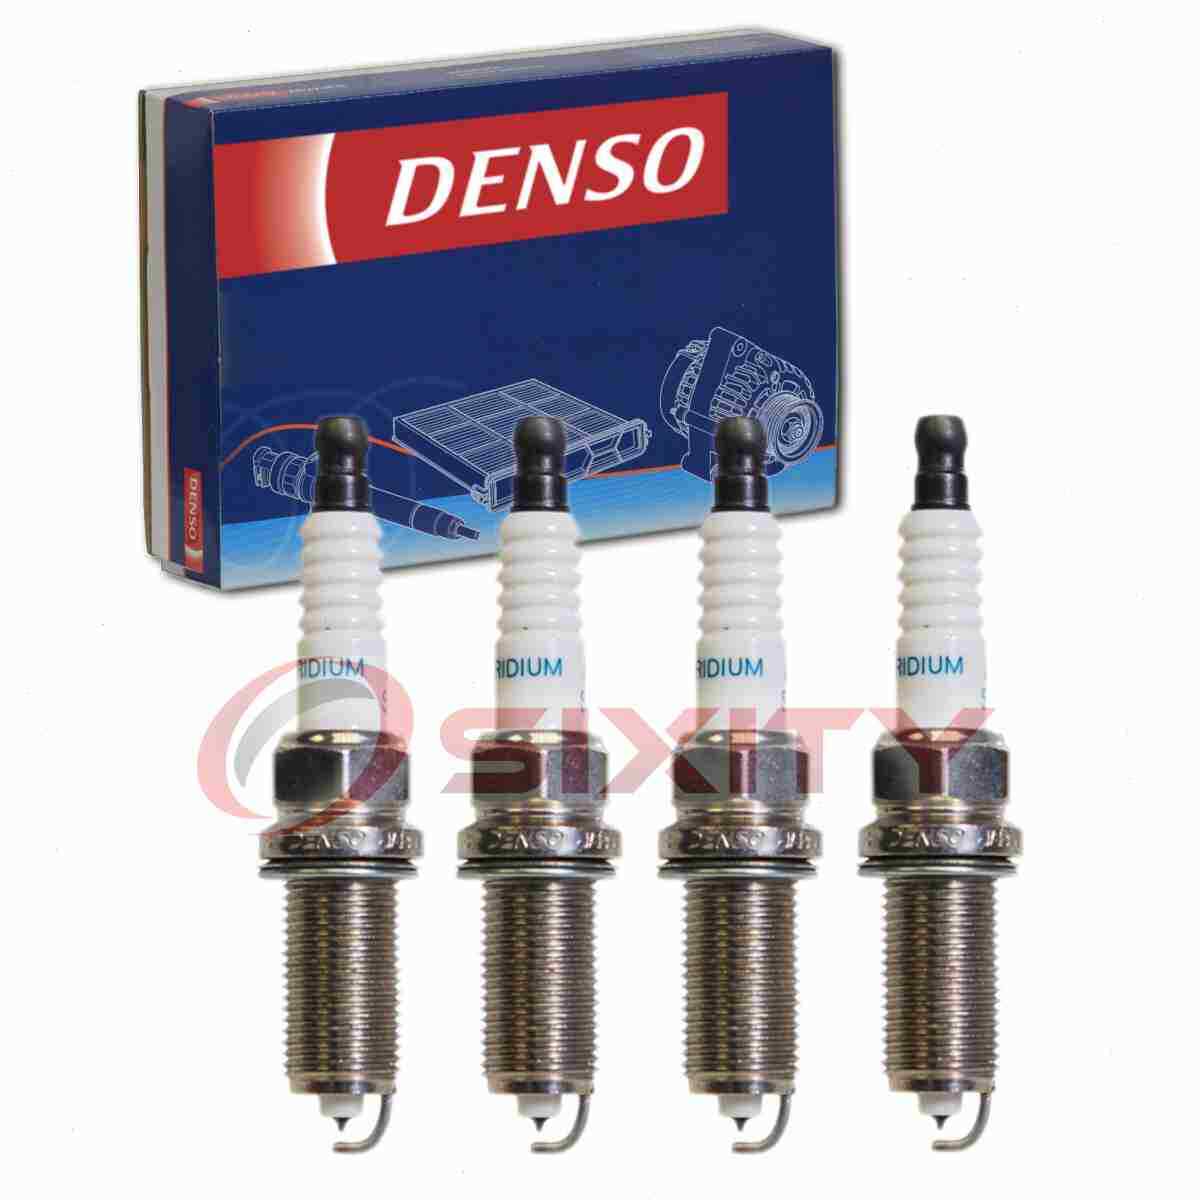 4 pc DENSO 3421 Spark Plugs for SK20HR11 MN158596 90919-A1002 90919-01235 ff